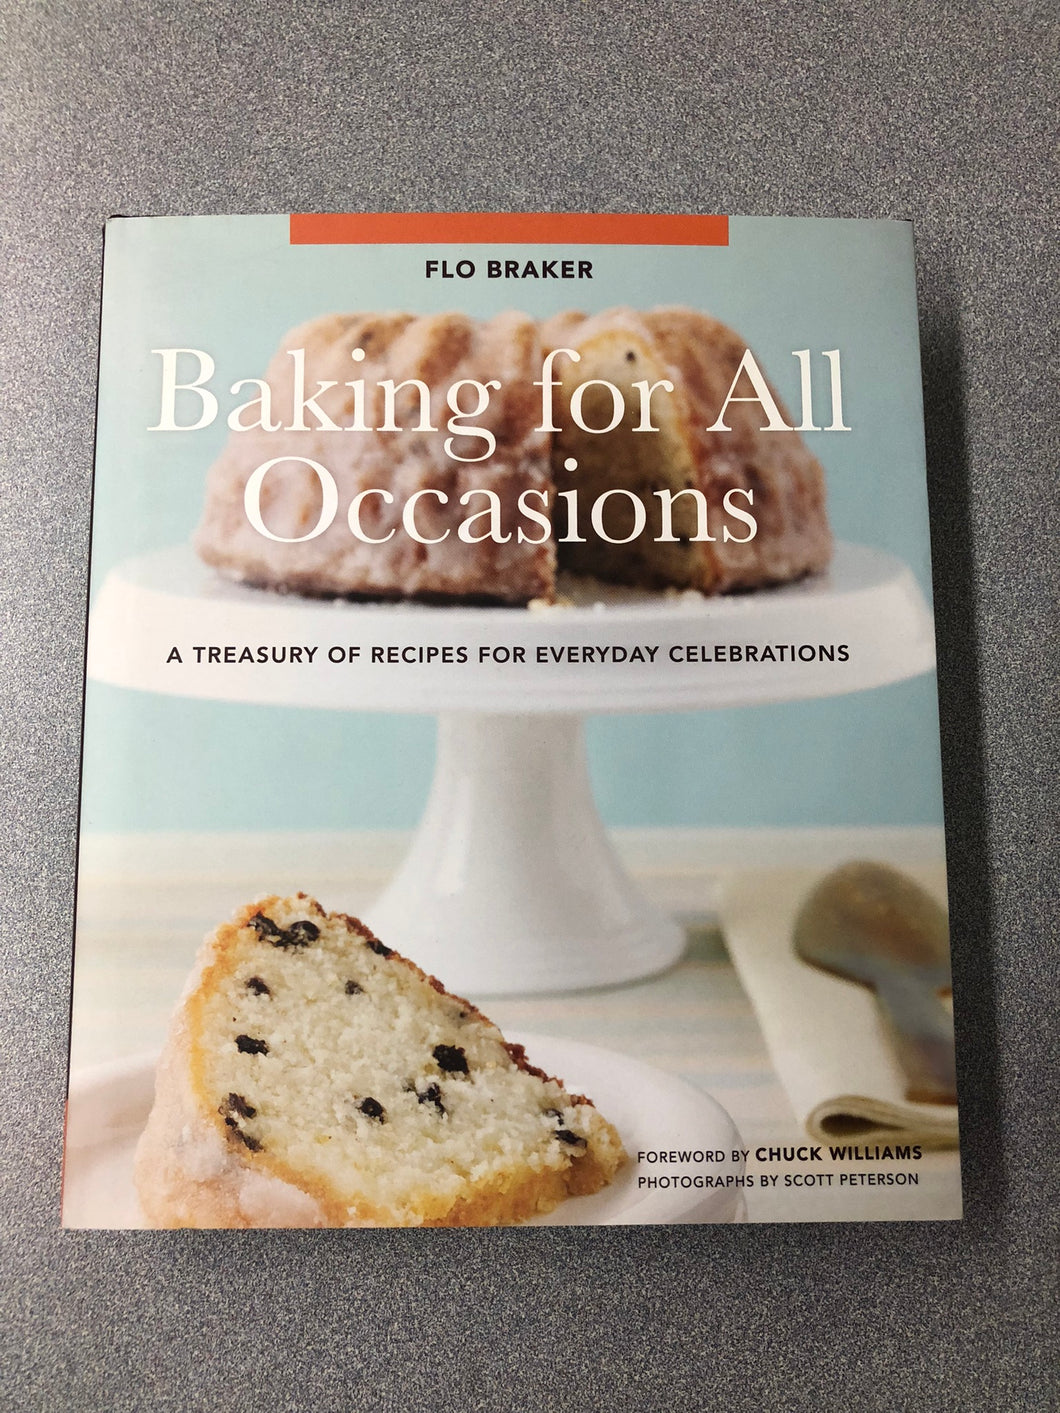 Baking for All Occasions: A Treasury of Recipes for Everyday Celebrations, Braker, Flo [2008] CO 9/22